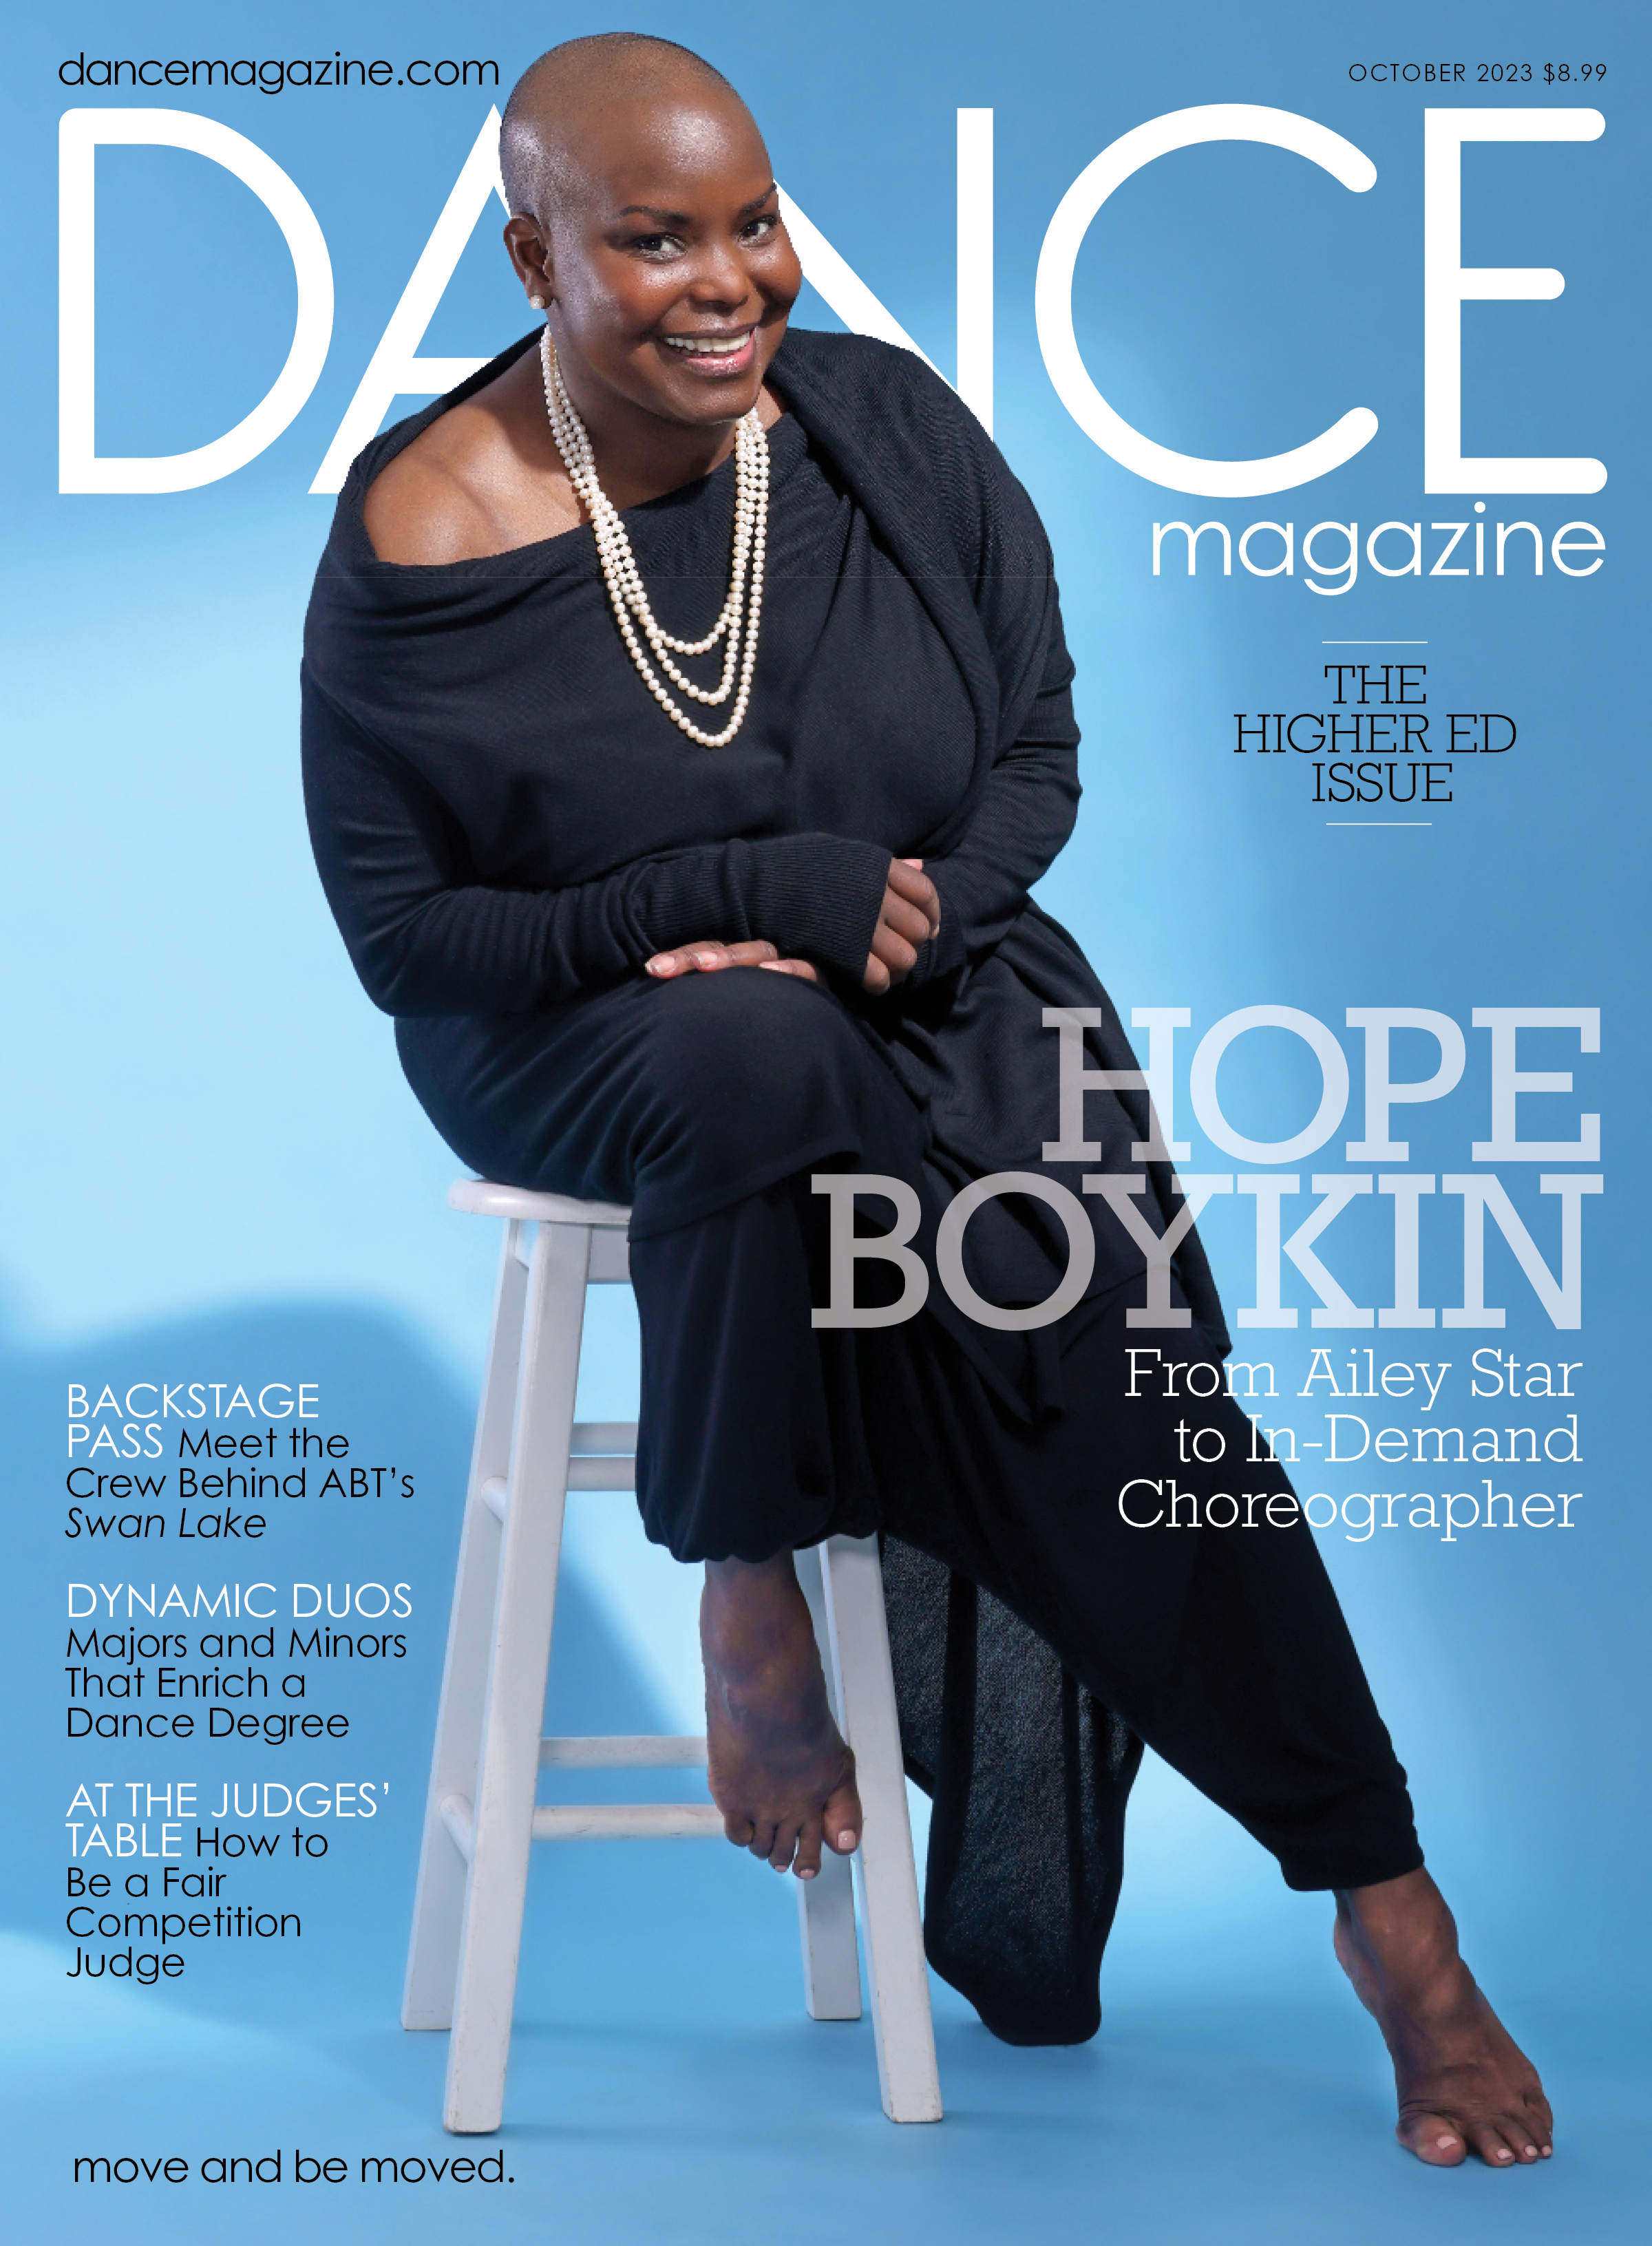 The cover of the October 2023 issue of Dance Magazine. Hope Boykin, a petite, curvy Black woman with a shaved head, smiles warmly at the viewer as she perches on a white stool, leaning forward as though letting you in on a joke. Her black dress drapes elegantly around her and to the floor as she outstretches an arched foot. The largest cover line reads, "Hope Boykin: From Ailey Star to In-Demand Choreographer."